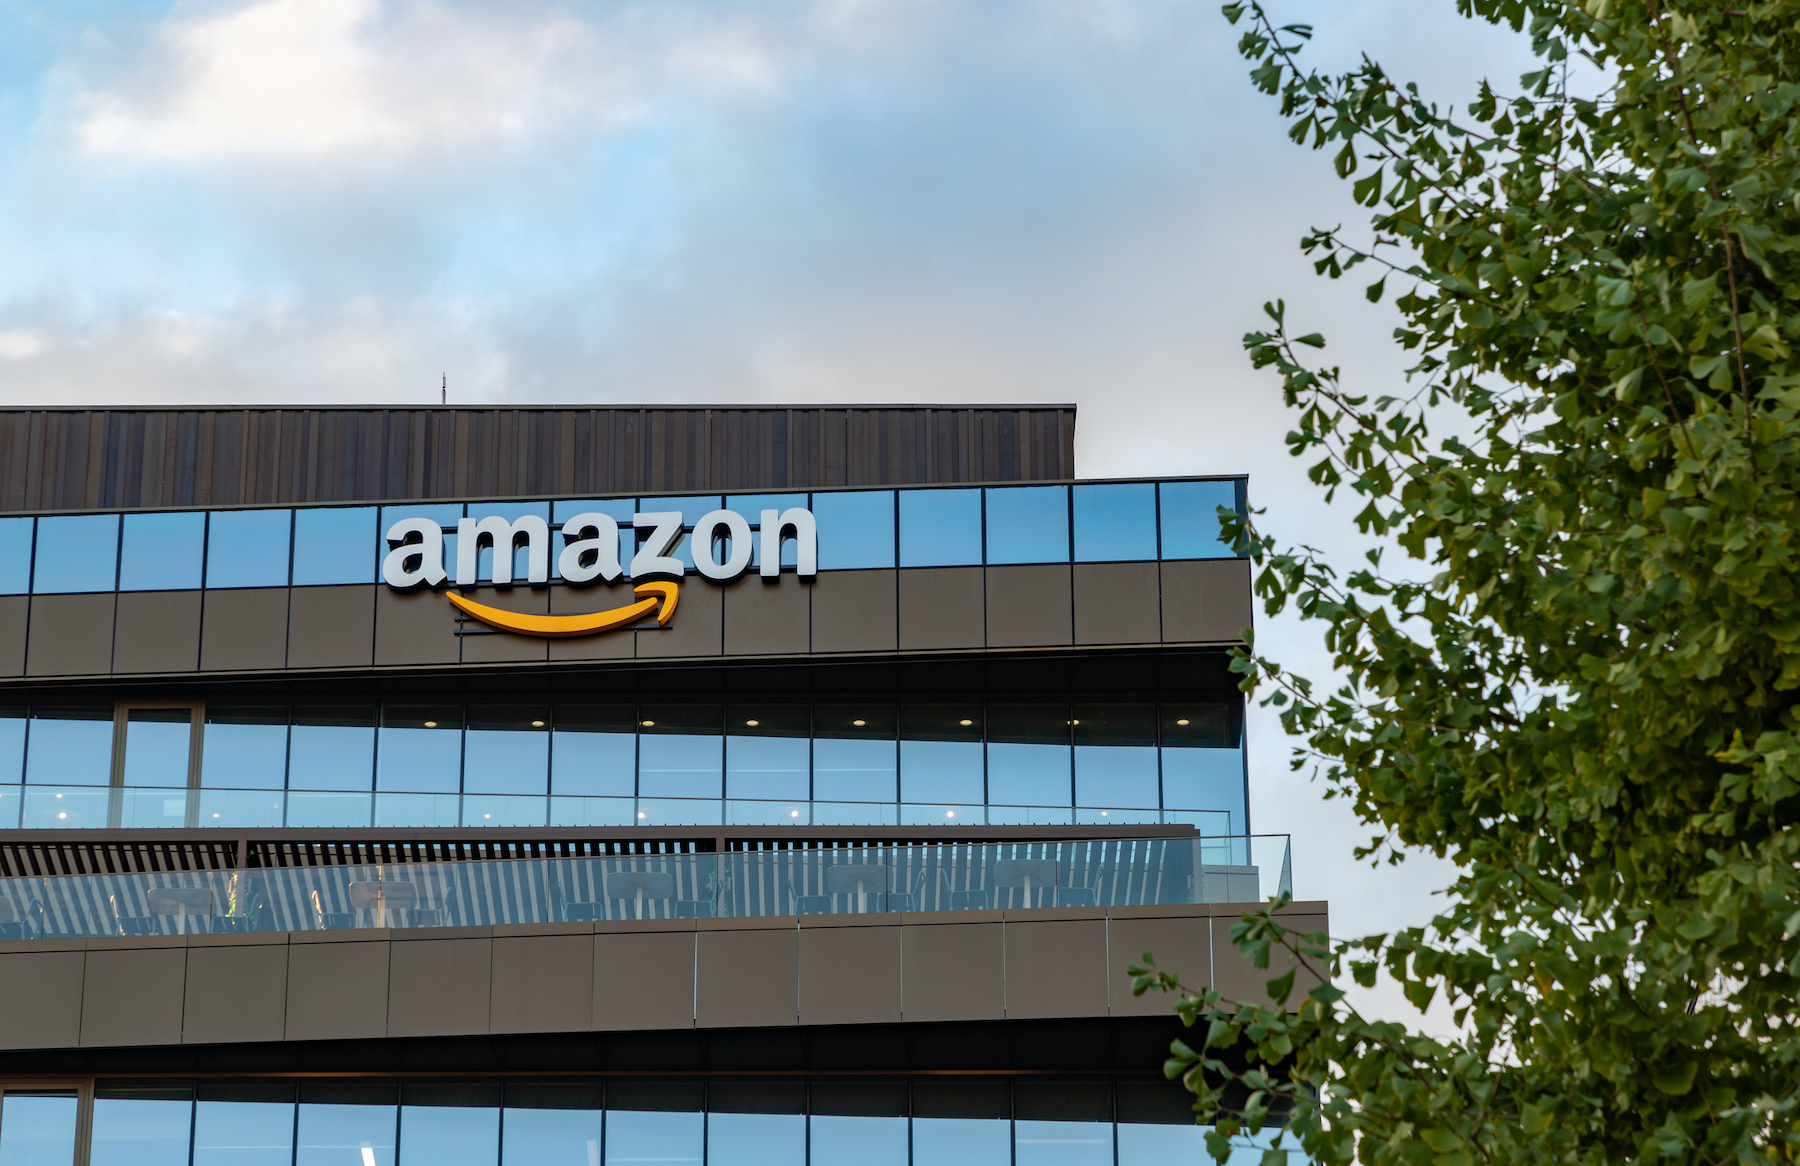 Amazon lays off hundreds at its IT centers in Romania amid global restructuring in the tech sector